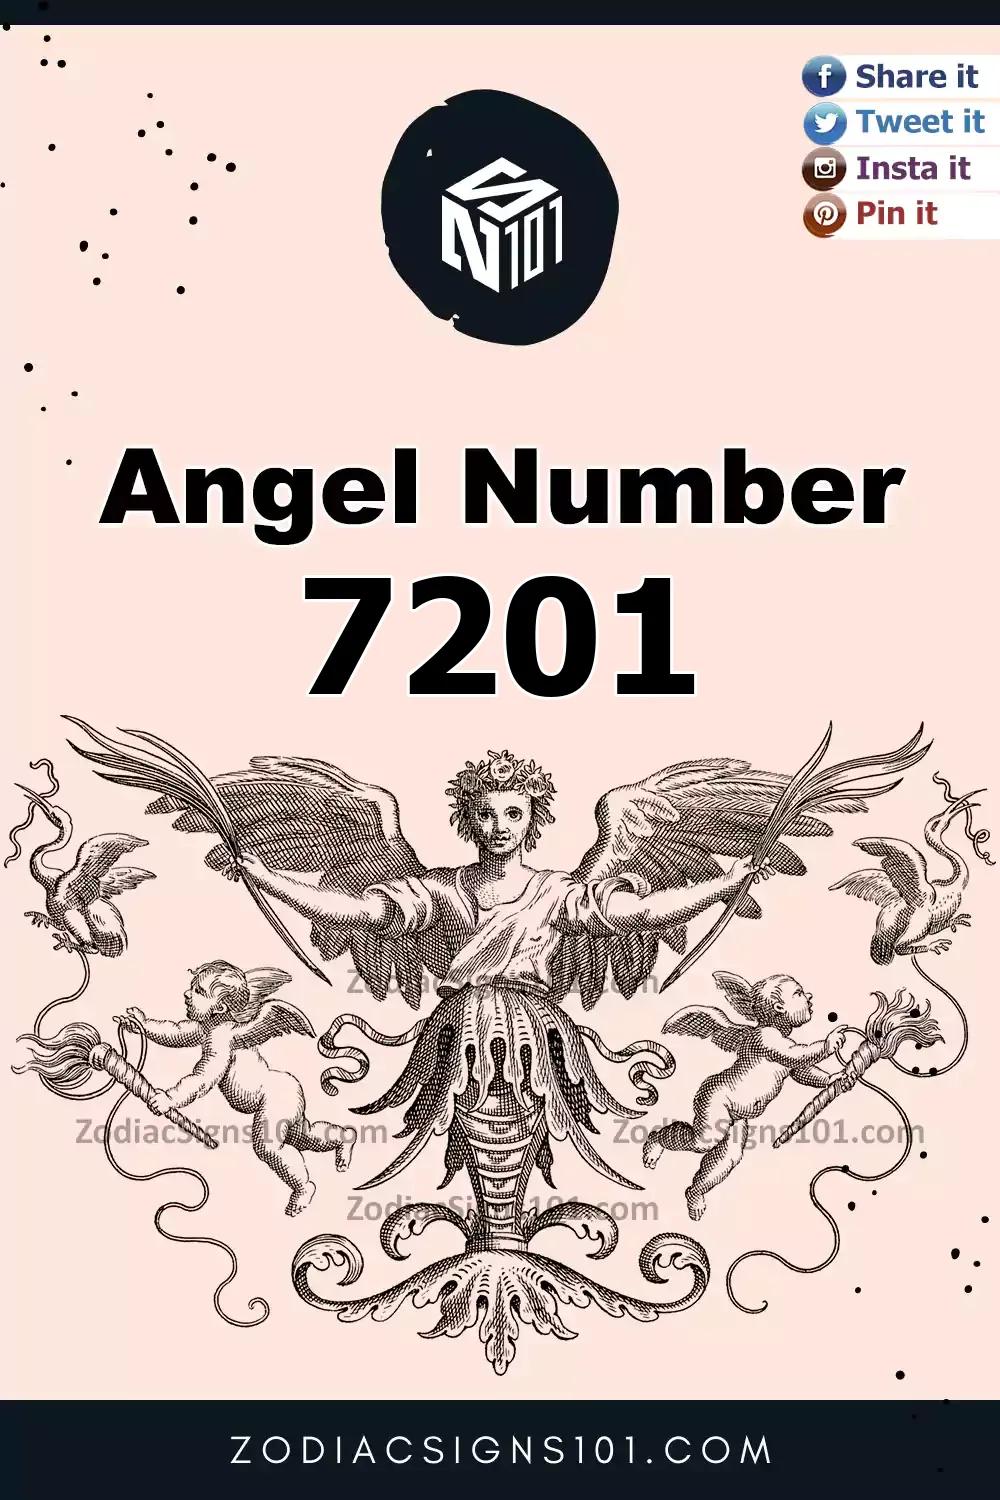 7201 Angel Number Meaning